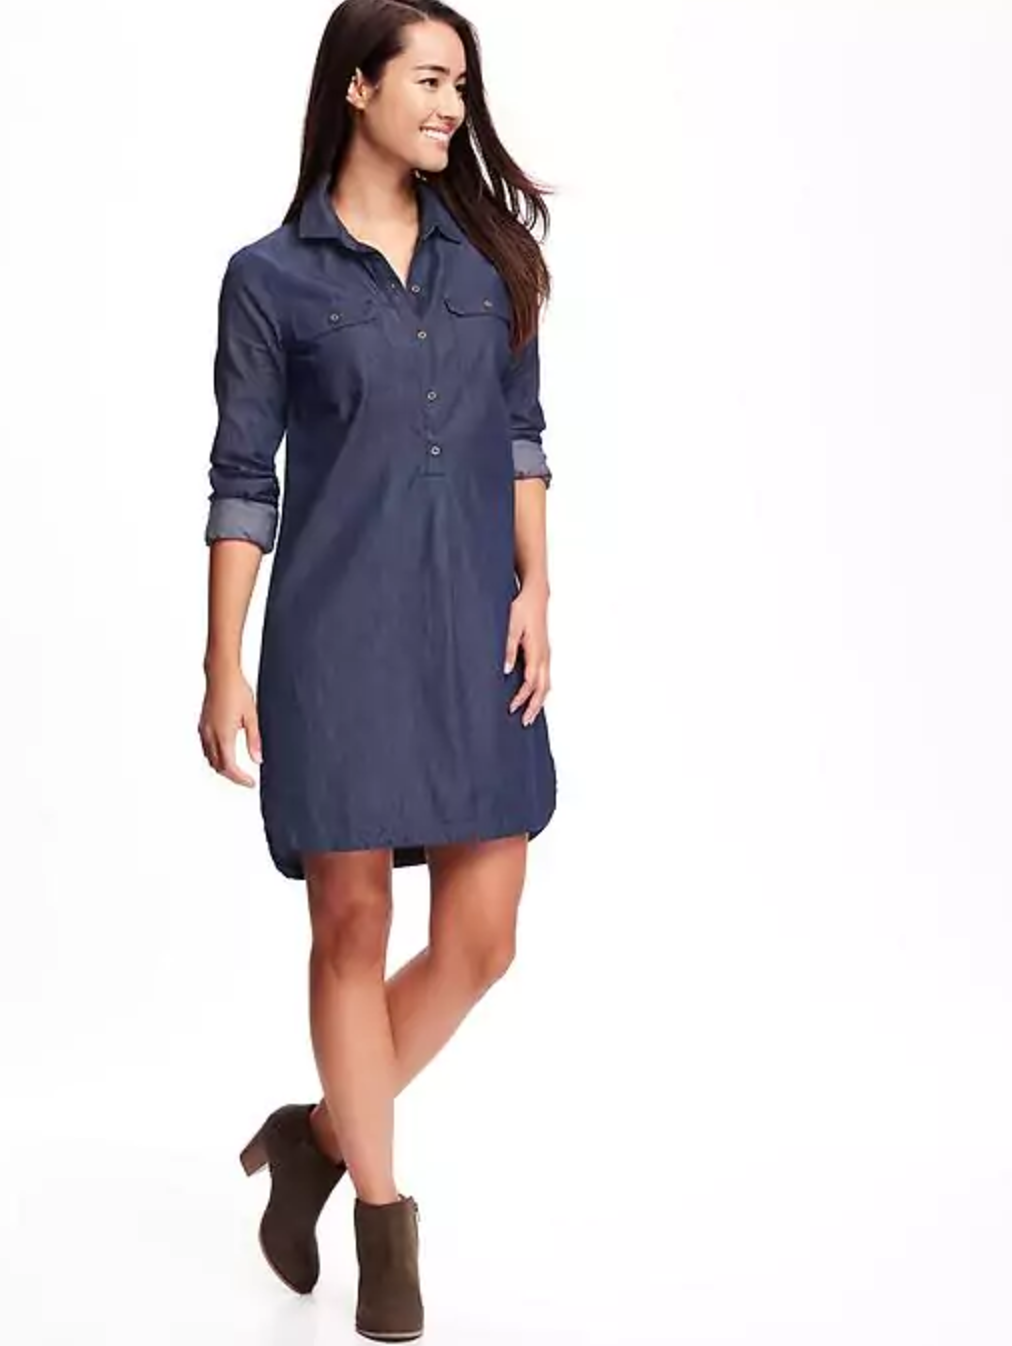 old navy chambray dressSummer Sales Are On: Items To Buy Now & Use Now